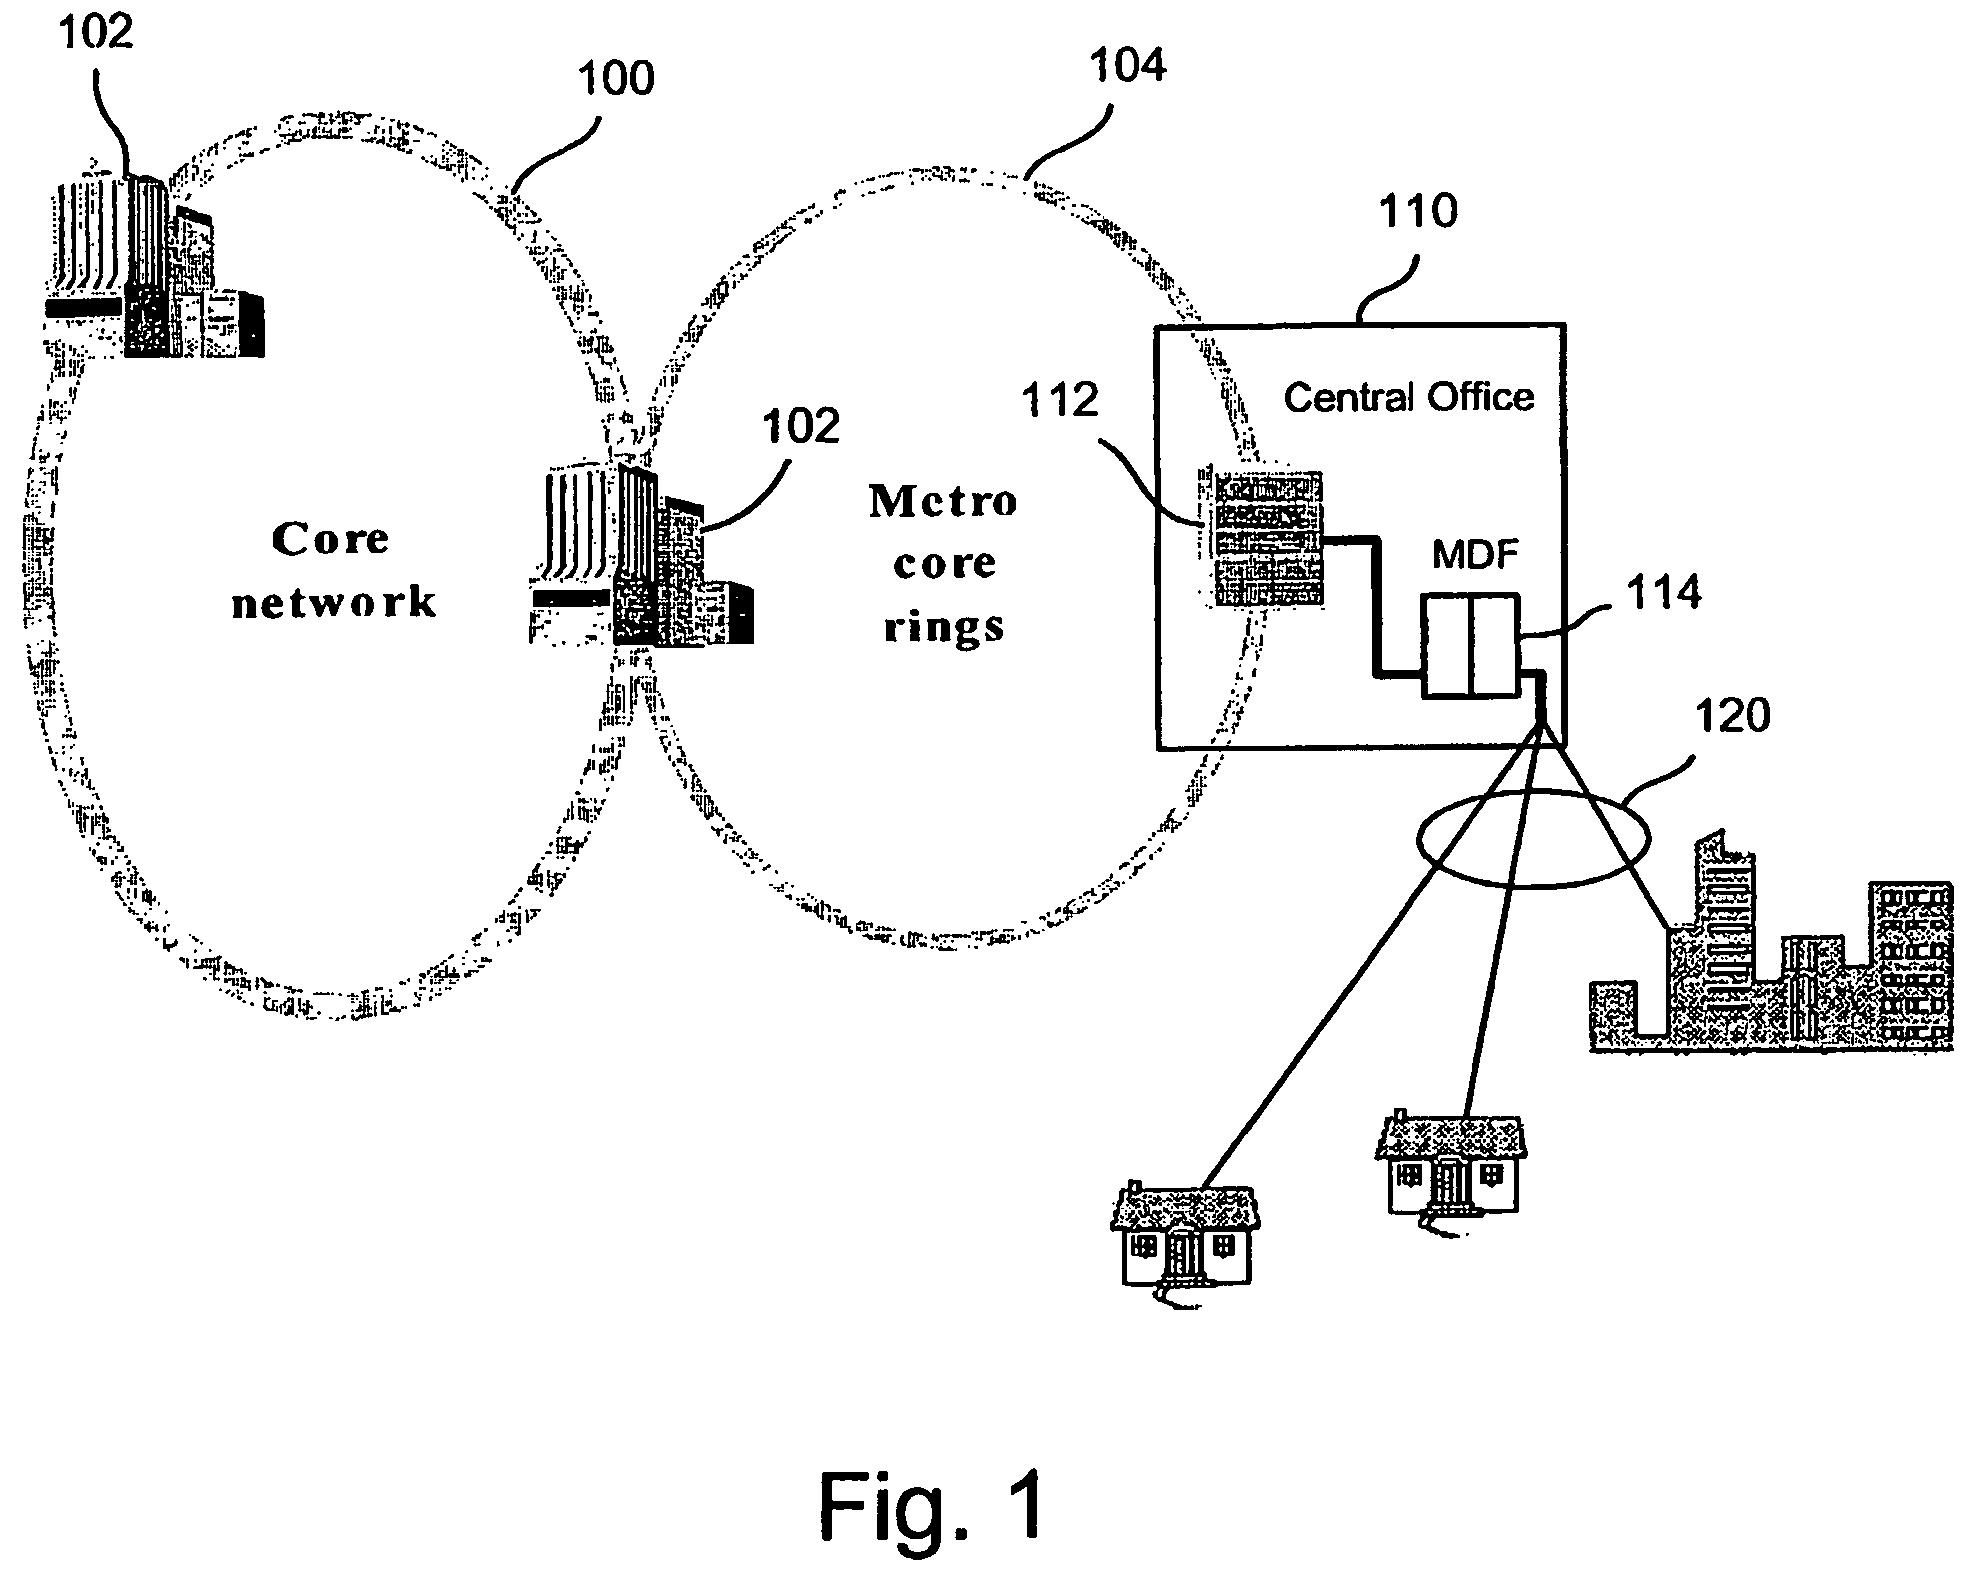 Method and System for Remotely  Automating Cross-Connnects in Telecom Networks